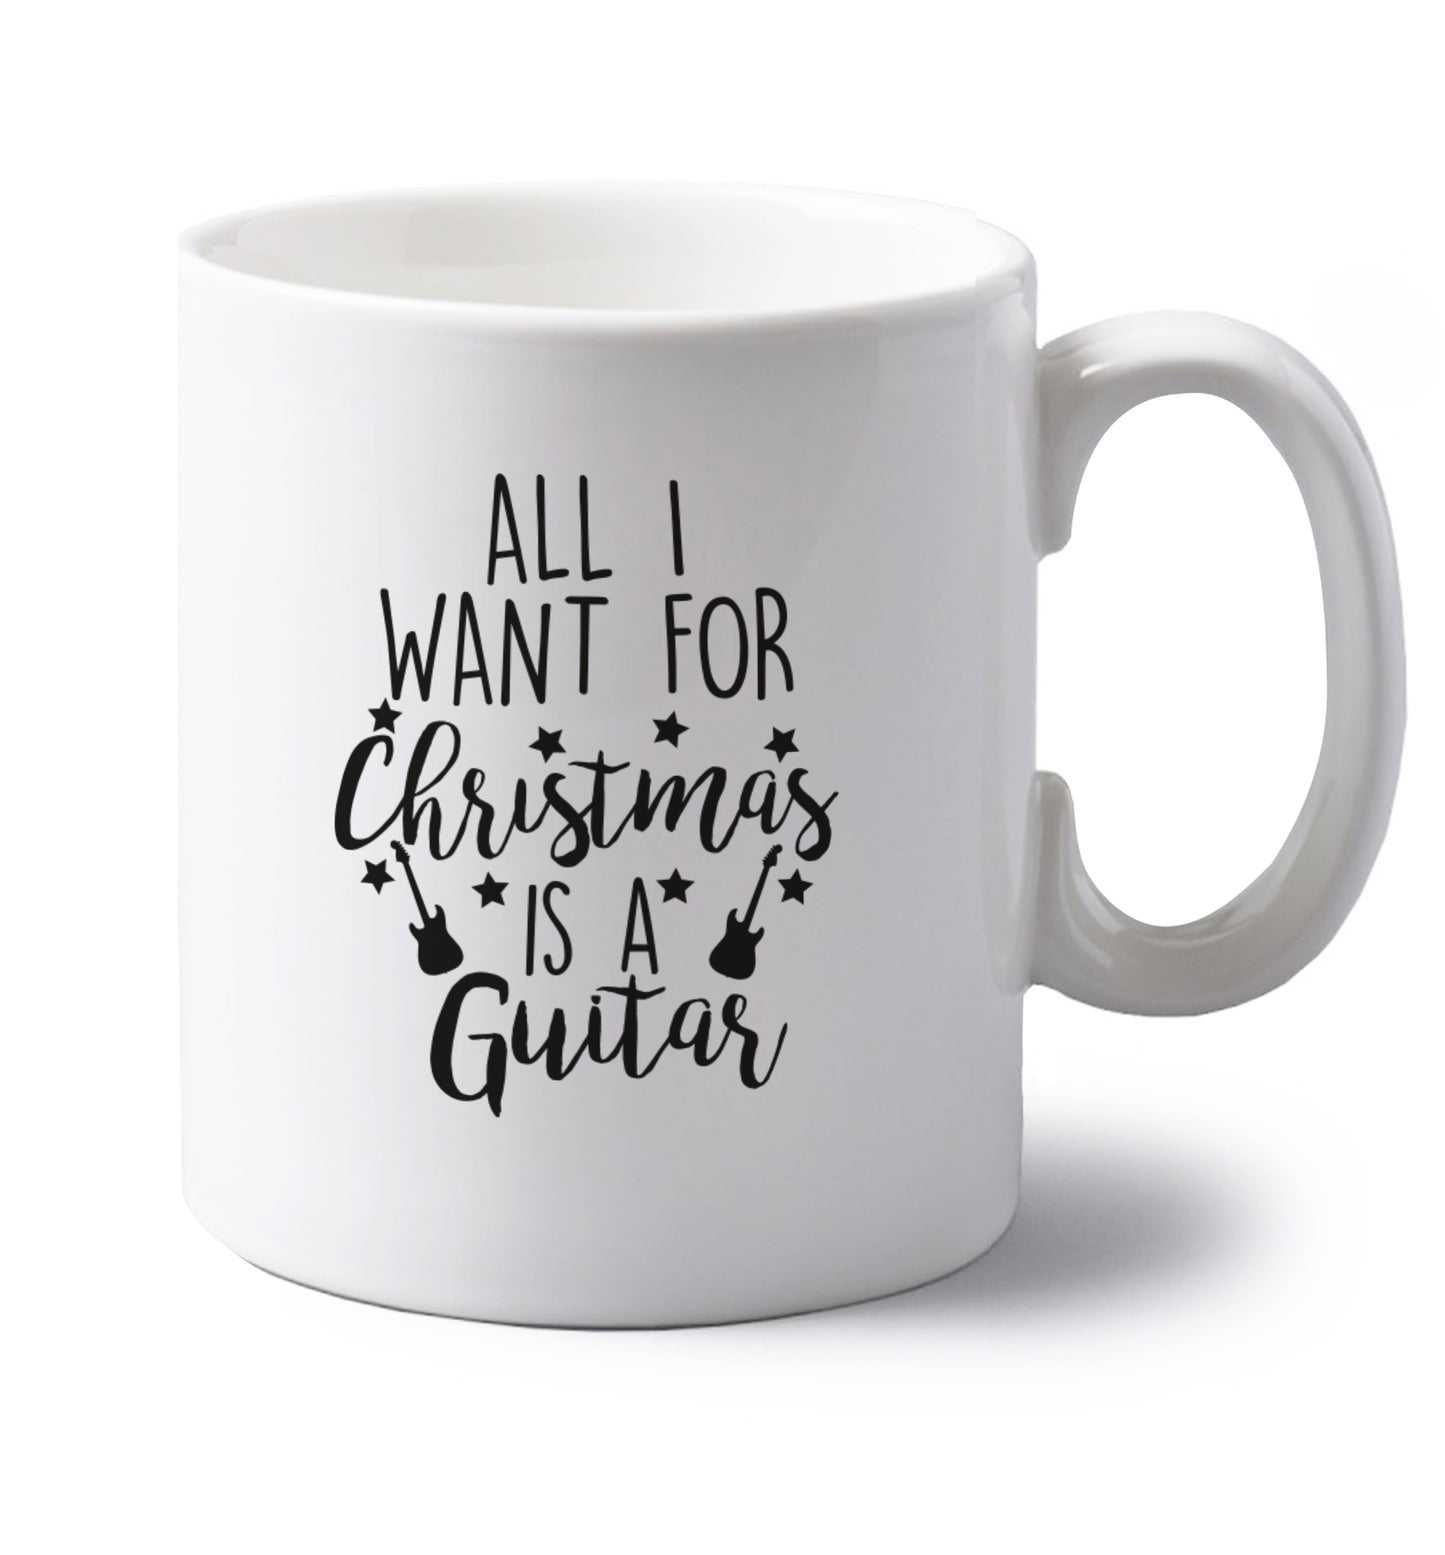 All I want for Christmas is a guitar left handed white ceramic mug 